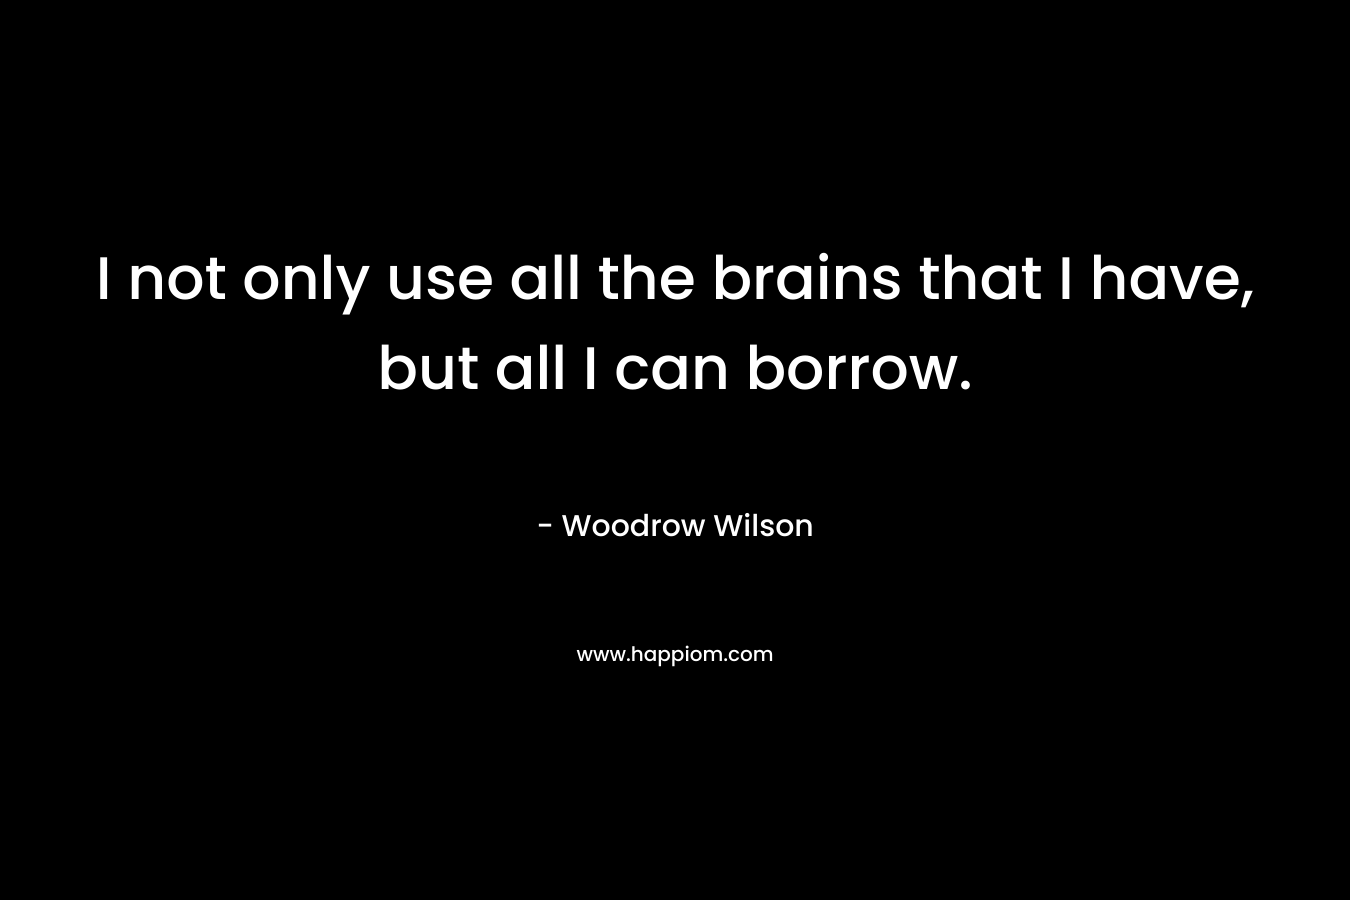 I not only use all the brains that I have, but all I can borrow. – Woodrow Wilson